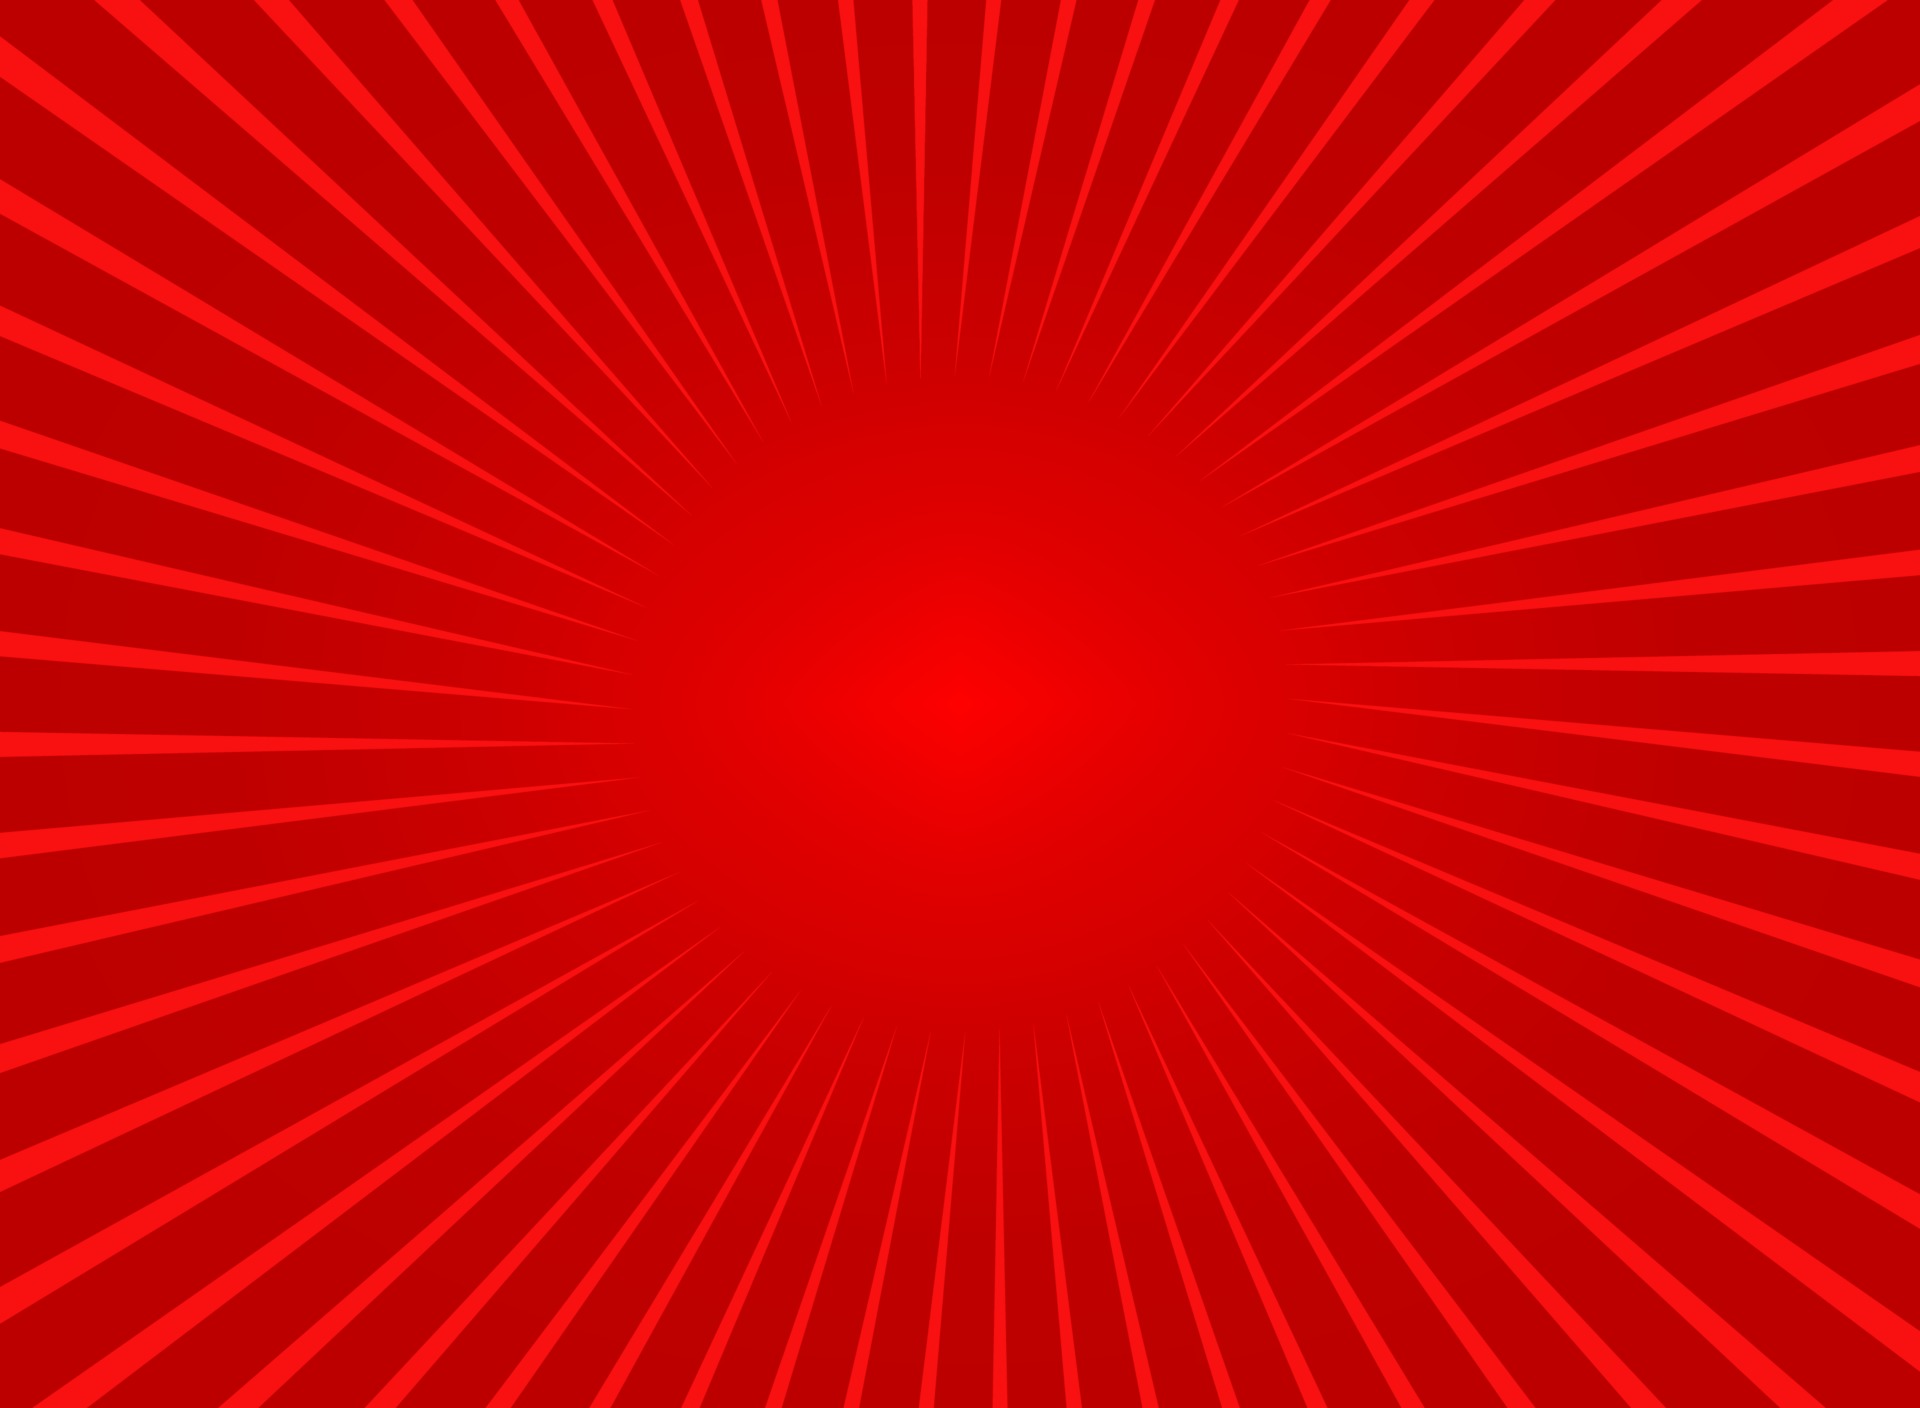 Abstract Red Sun Rays Background Vector Art At Vecteezy